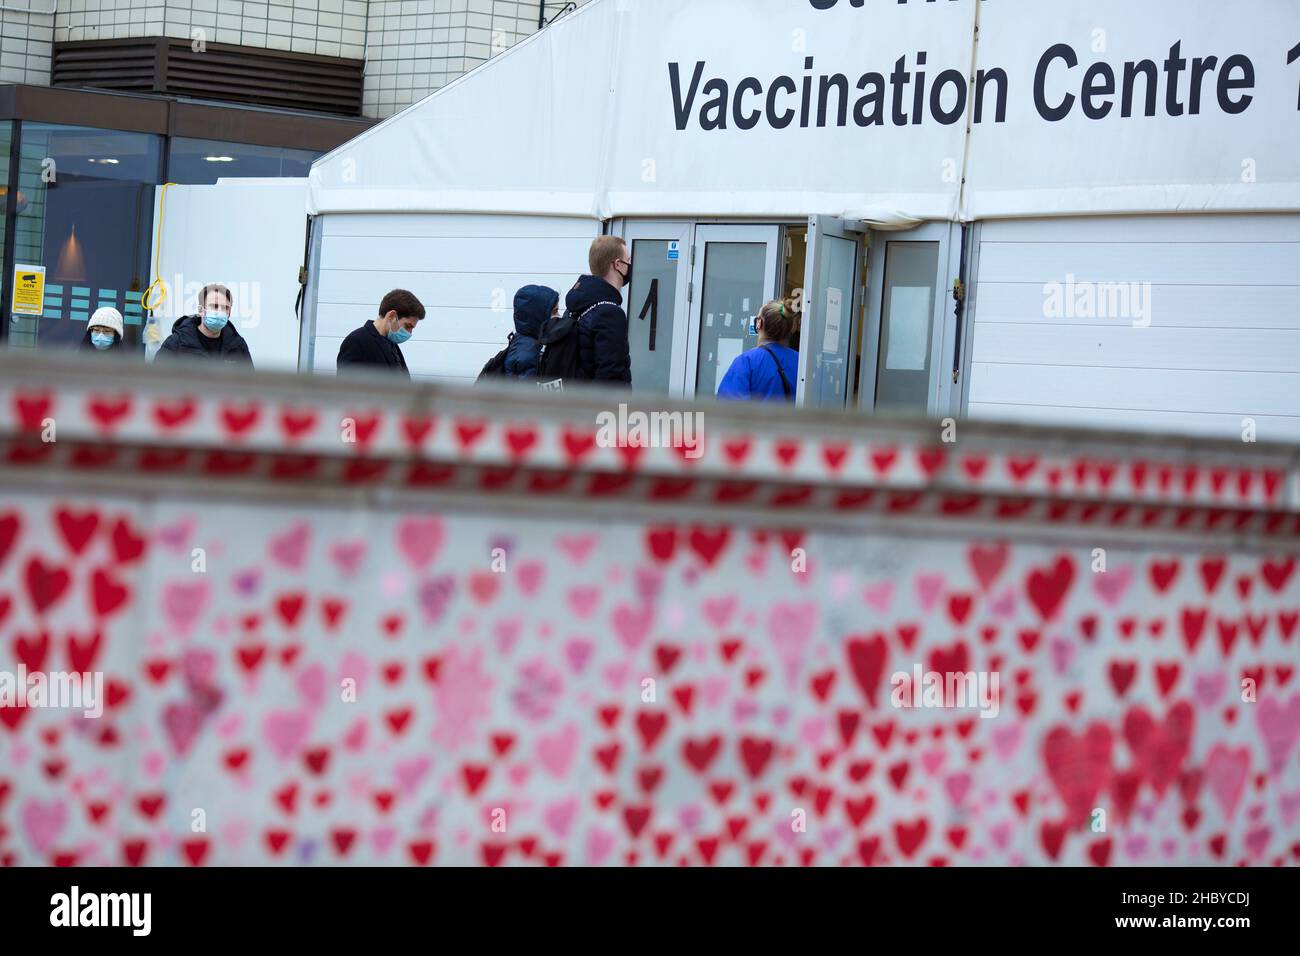 People are seen queuing towards a vaccination centre at St Thomas’ Hospital behind red hearts painted on the National Covid Memorial Wall in London. Stock Photo